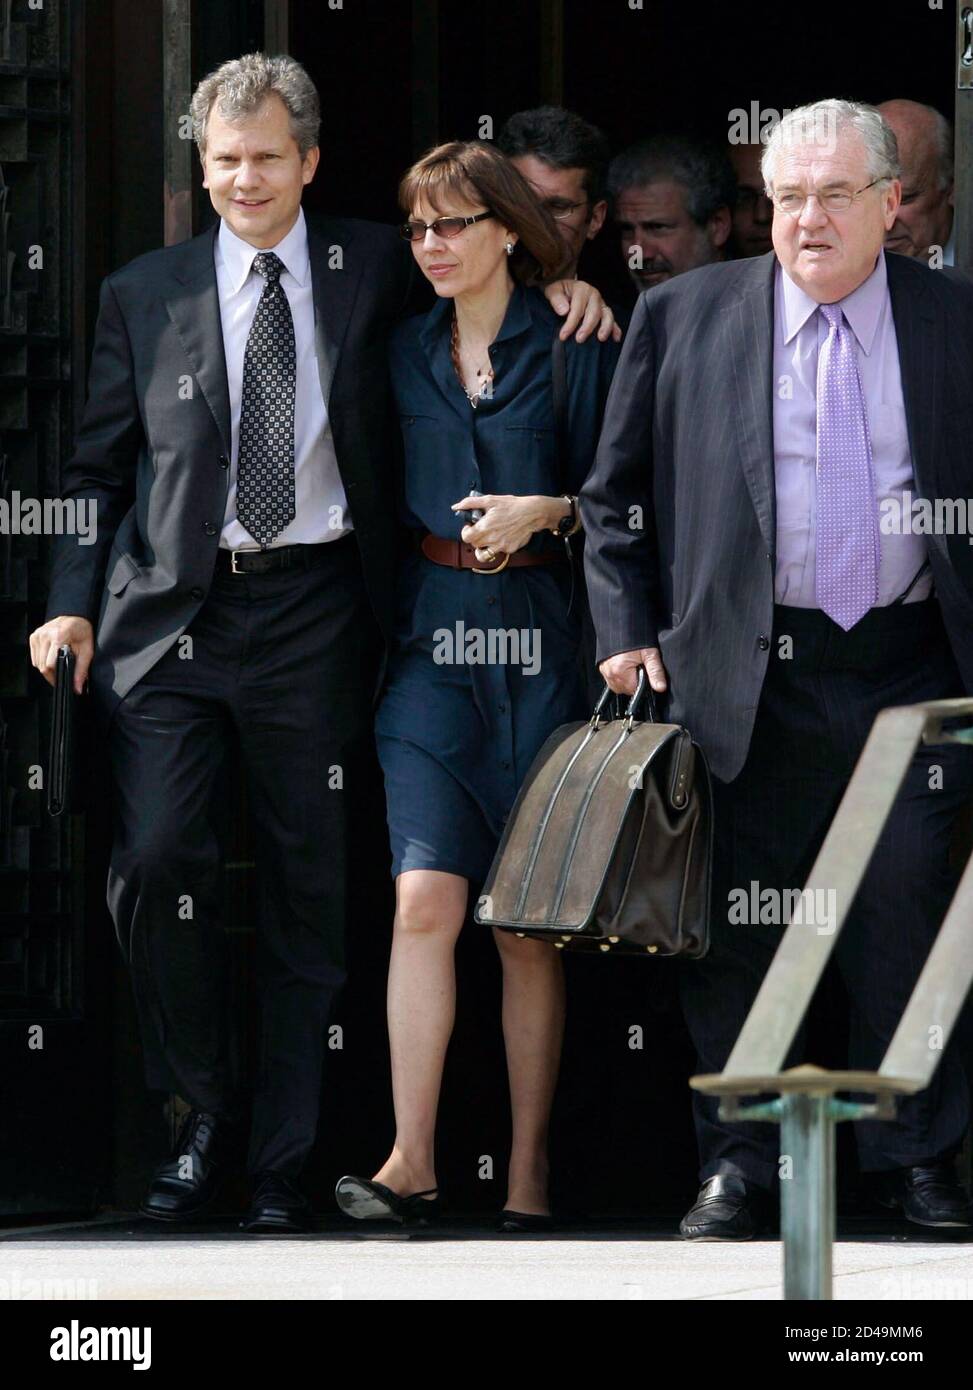 New York Times correspondent Judith Miller (C) walks with members of her legal team from the Federal Court in Washington June 29, 2005. The U.S. Supreme Court on June 27, 2005 rejected an appeal by Miller and Time magazine reporter Matthew Cooper who argued that they should not have to reveal their confidential sources to a grand jury investigating the leak by government officials of a covert CIA operative's name to the news media. REUTERS/Jason Reed  JIR/TC Stock Photo